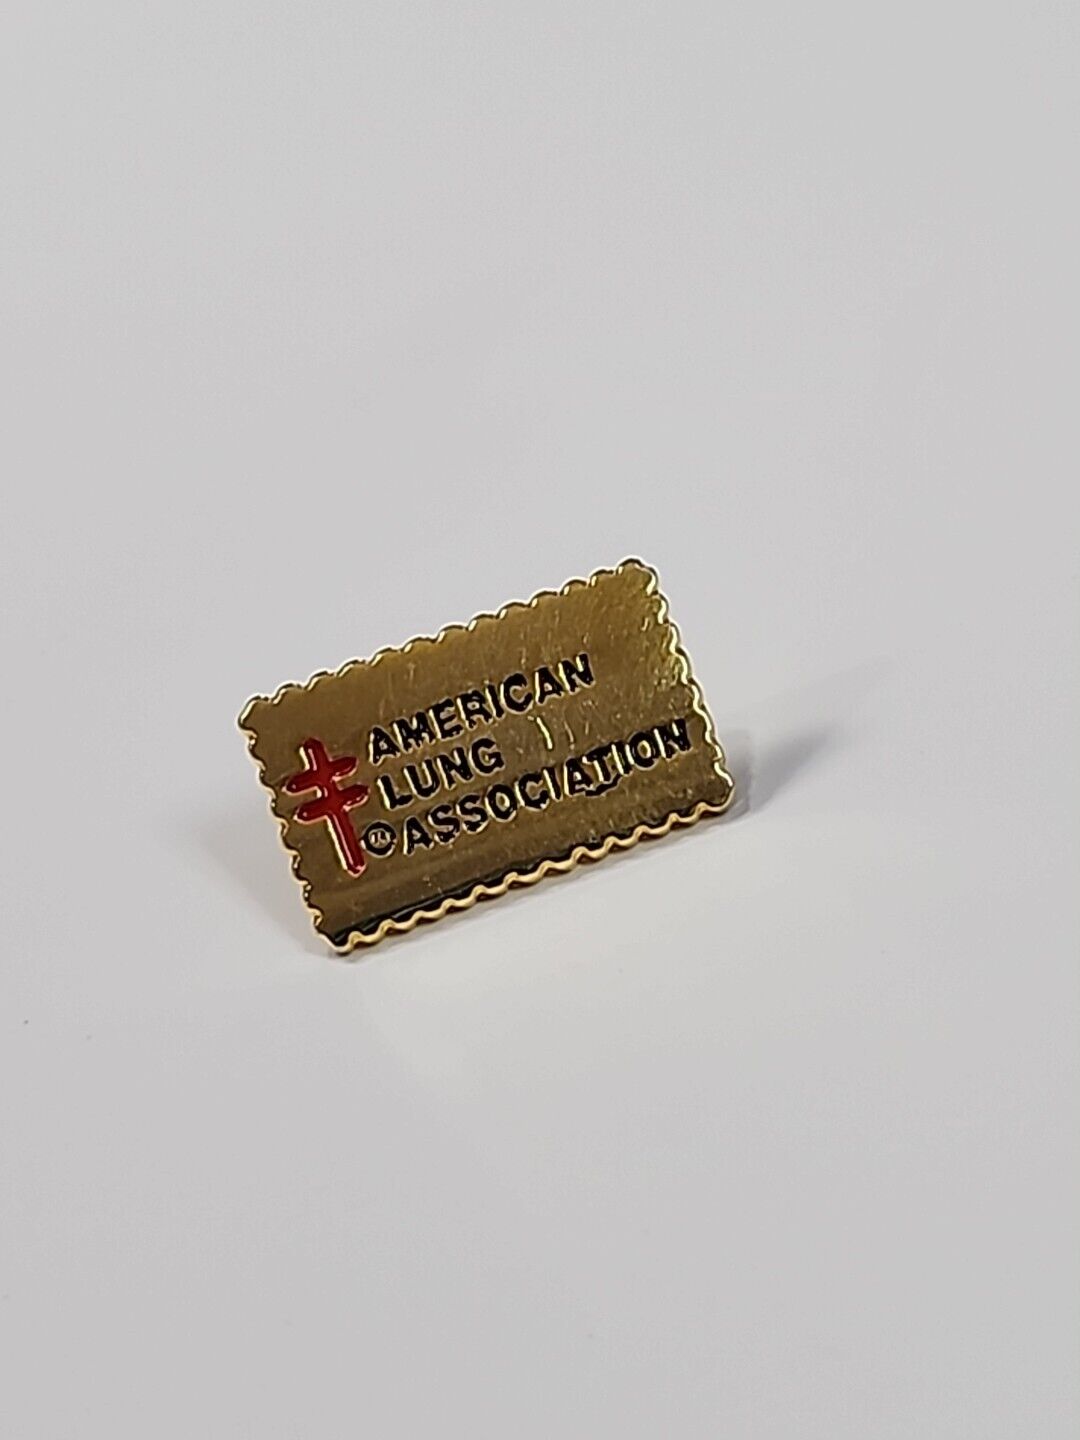 American Lung Association Lapel Pin RARE Red & Gold Color Very Small